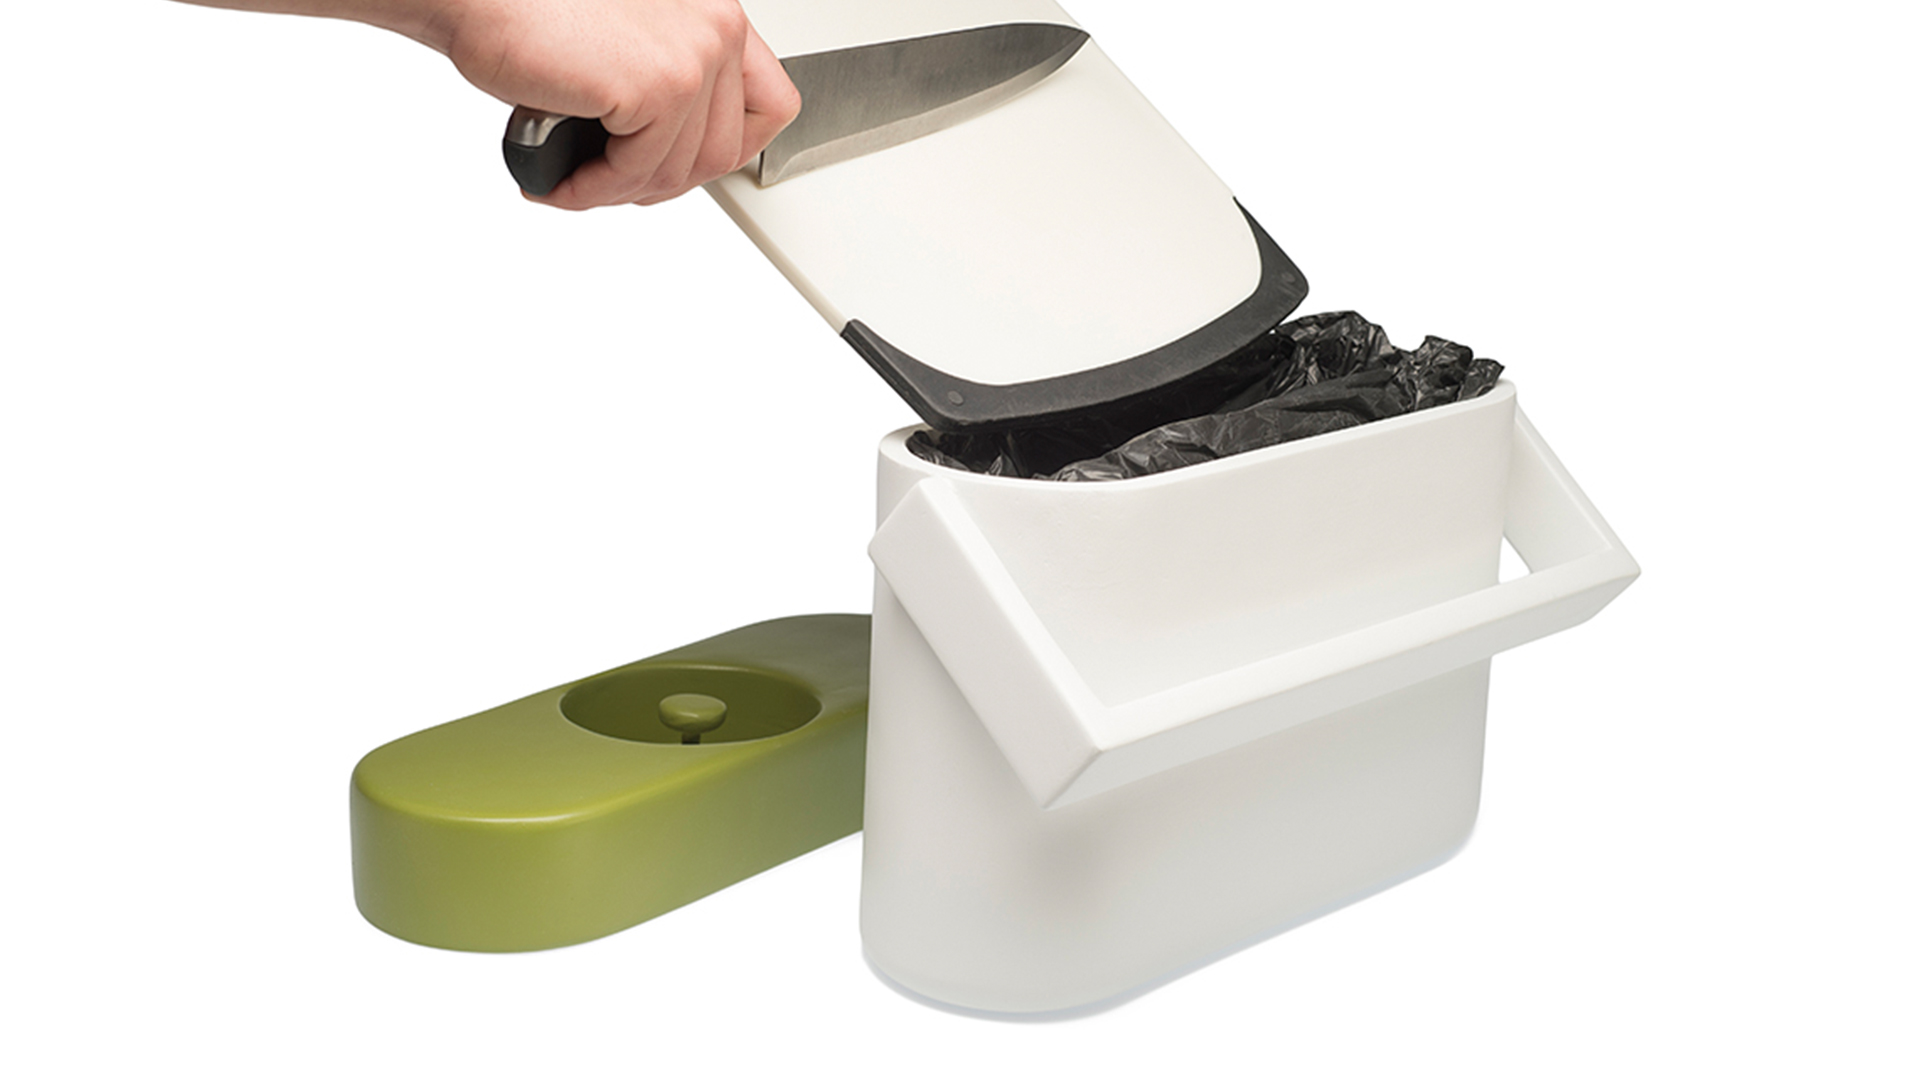 Green lid removed and next to pail as someone holds cutting board and knife above opened pail